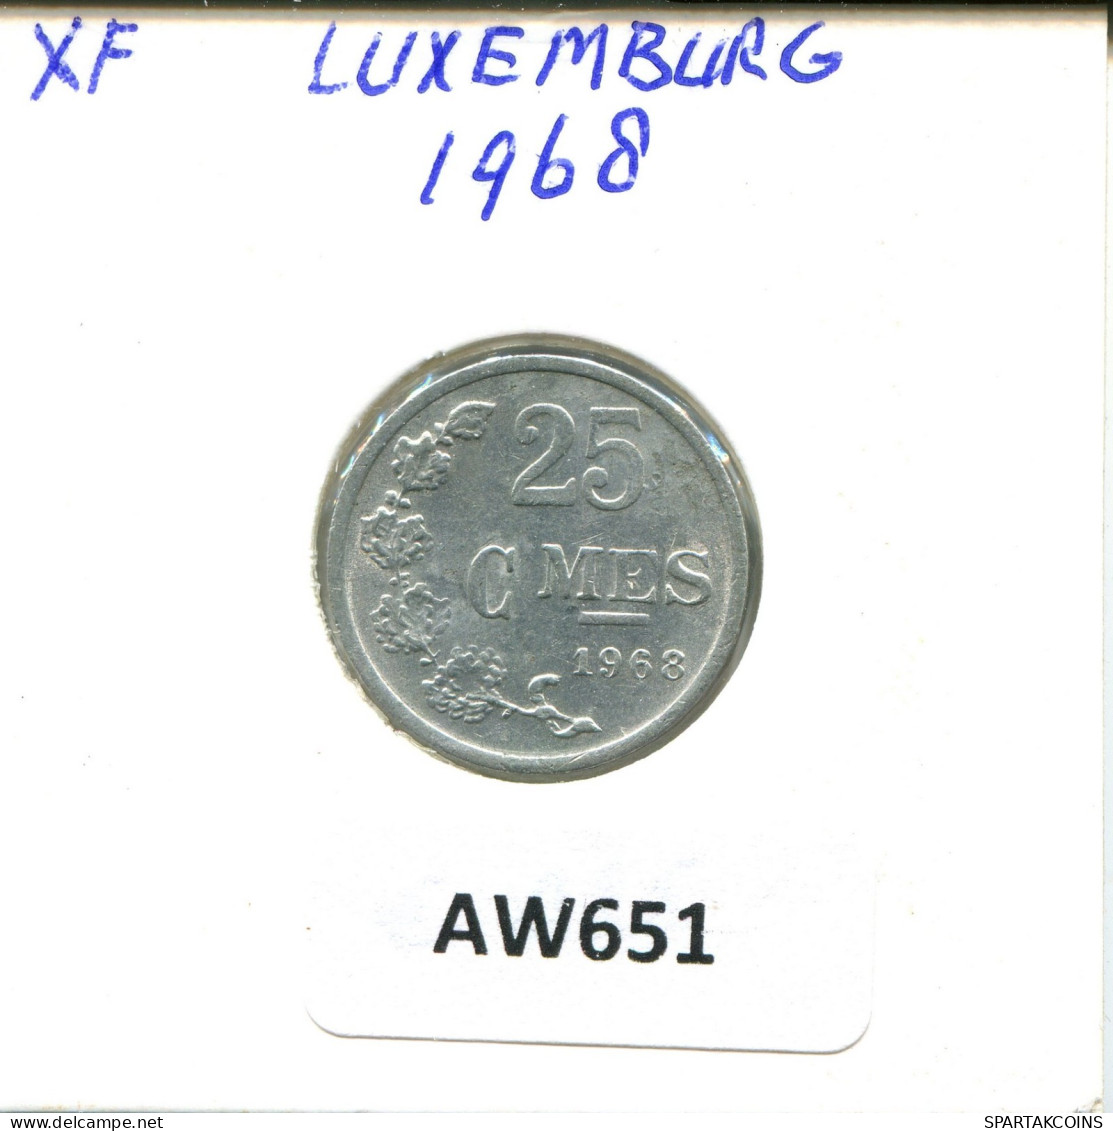 25 CENTIMES 1968 LUXEMBURG LUXEMBOURG Münze #AW651.D.A - Luxemburg